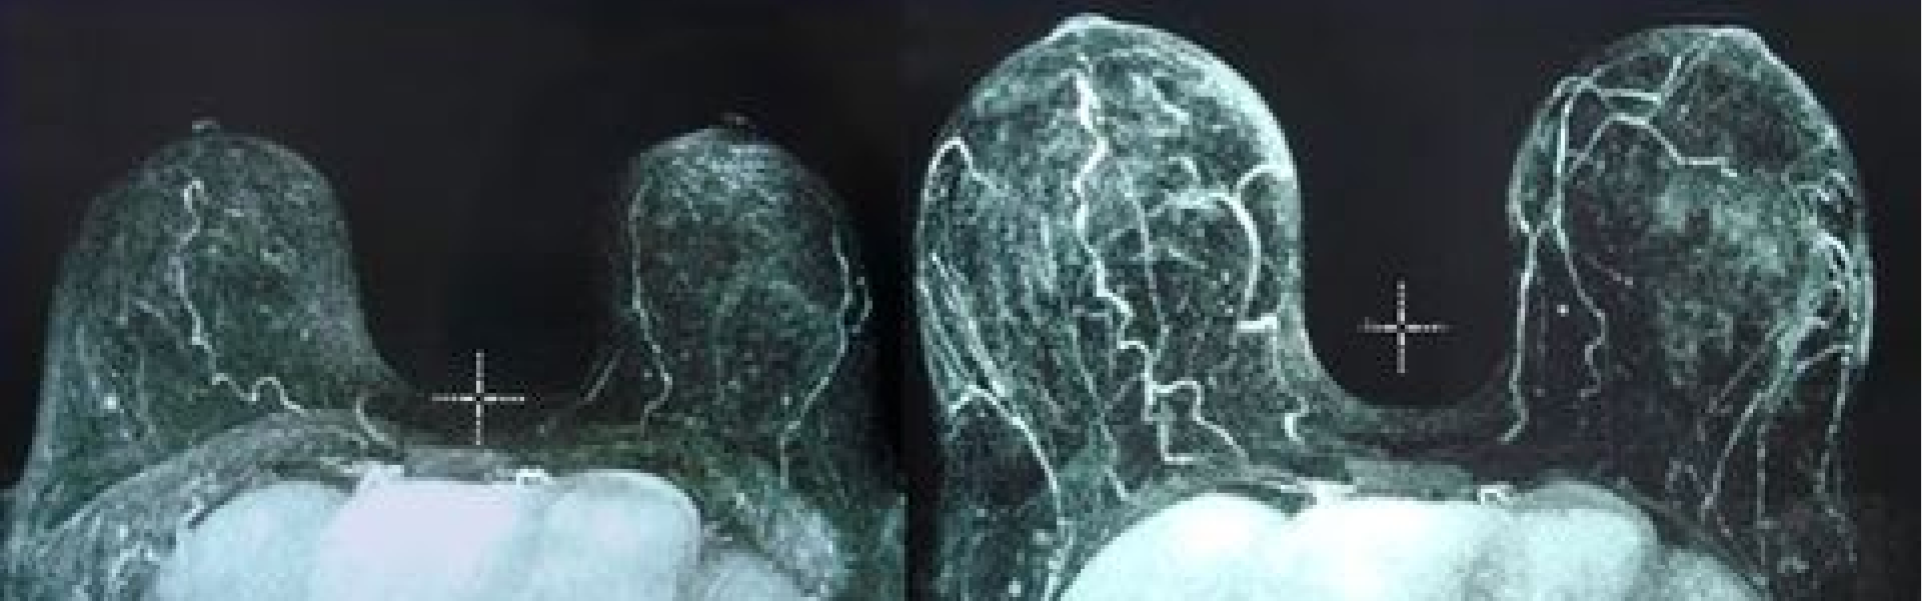 MRI Breast External Expander Before and After